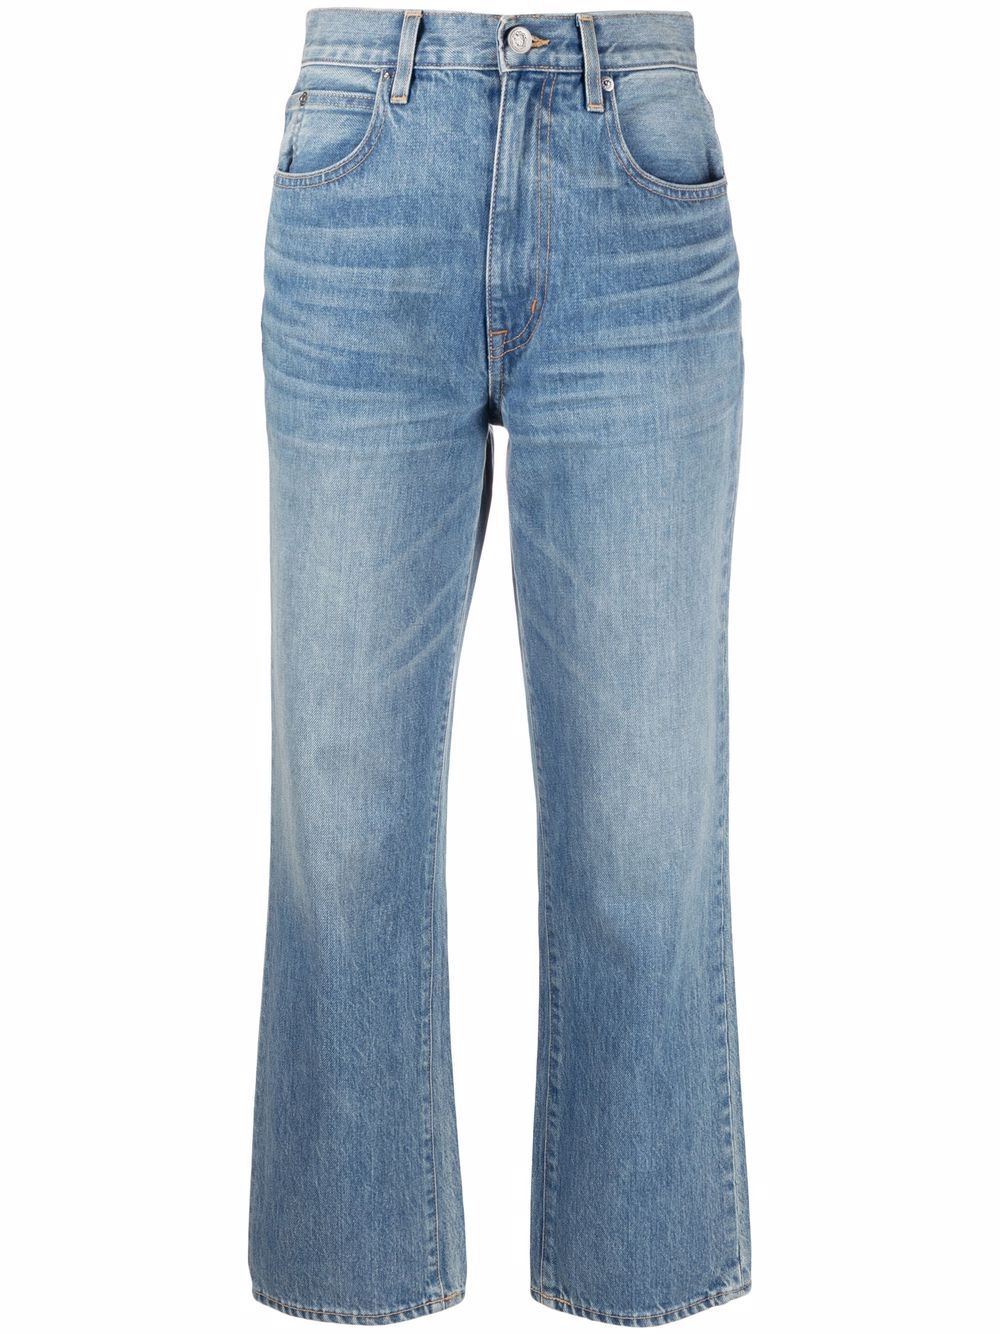 DENIM REFRESH: 7 PAIRS TO ADD TO YOUR CLOSET FOR FALL - Bradley Agather